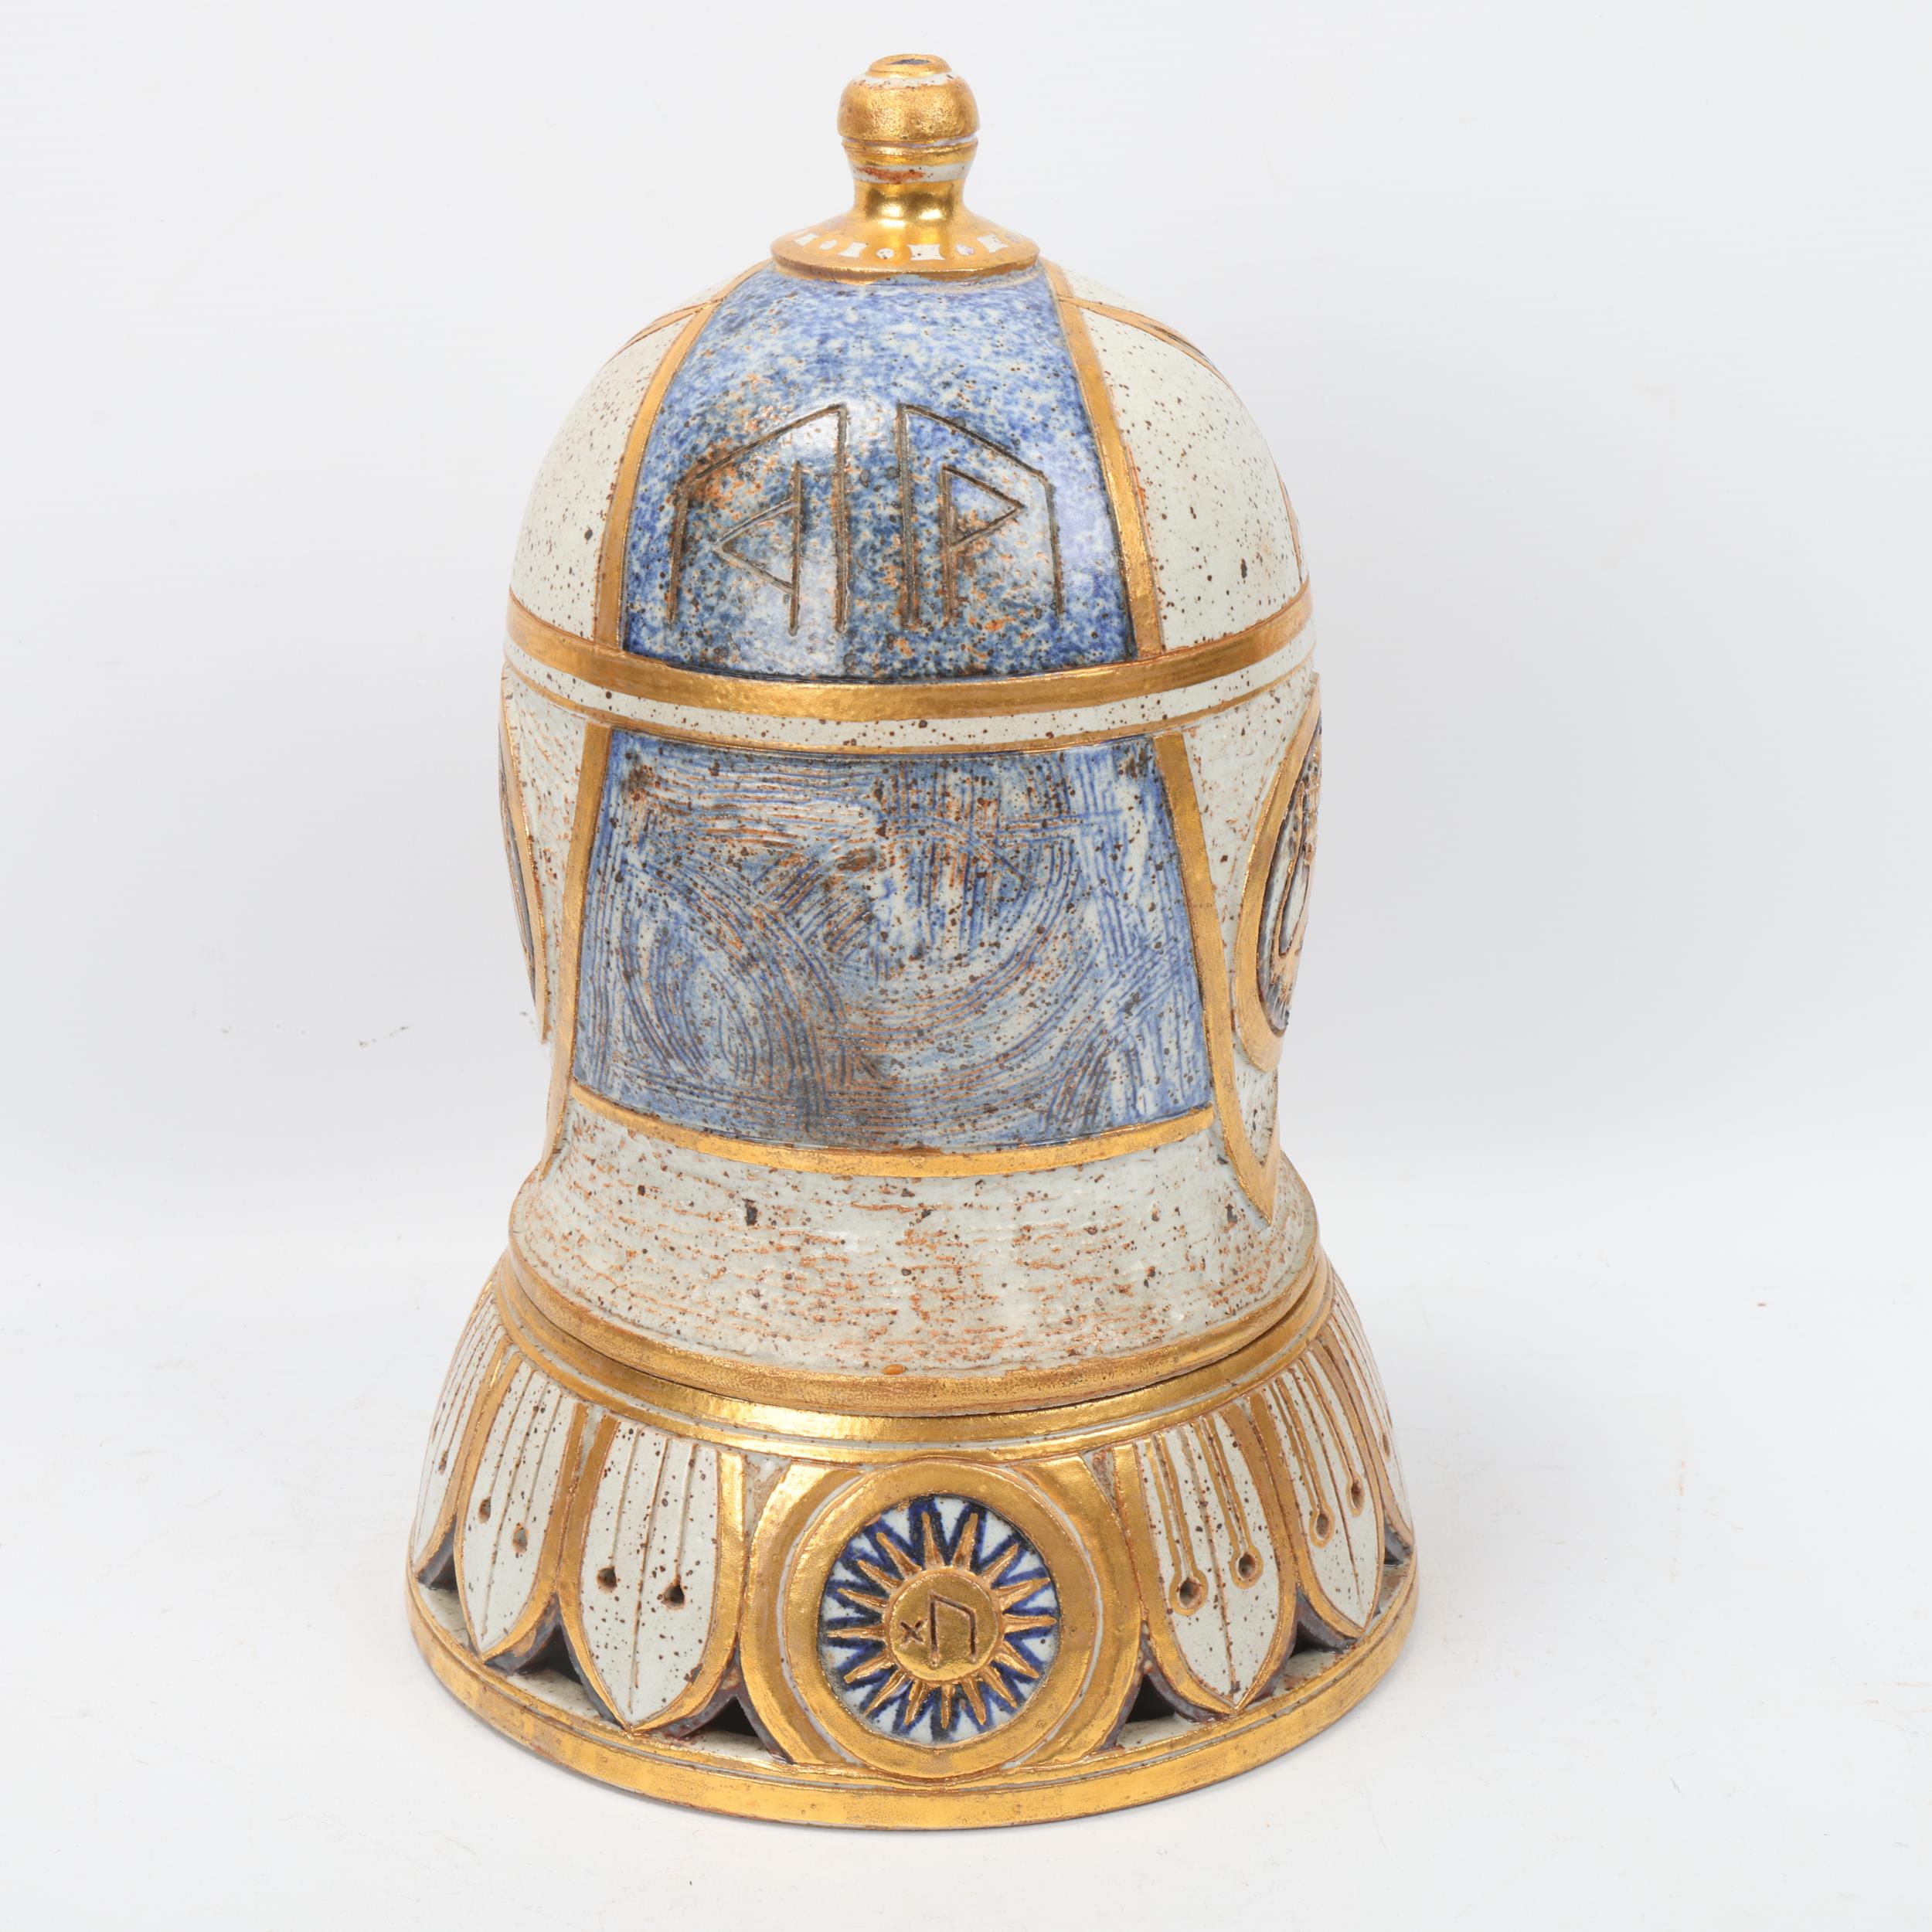 IAN PATTERSON, Black Mountain Pottery, Wales, a stoneware lantern and base with gilded glaze - Image 3 of 3